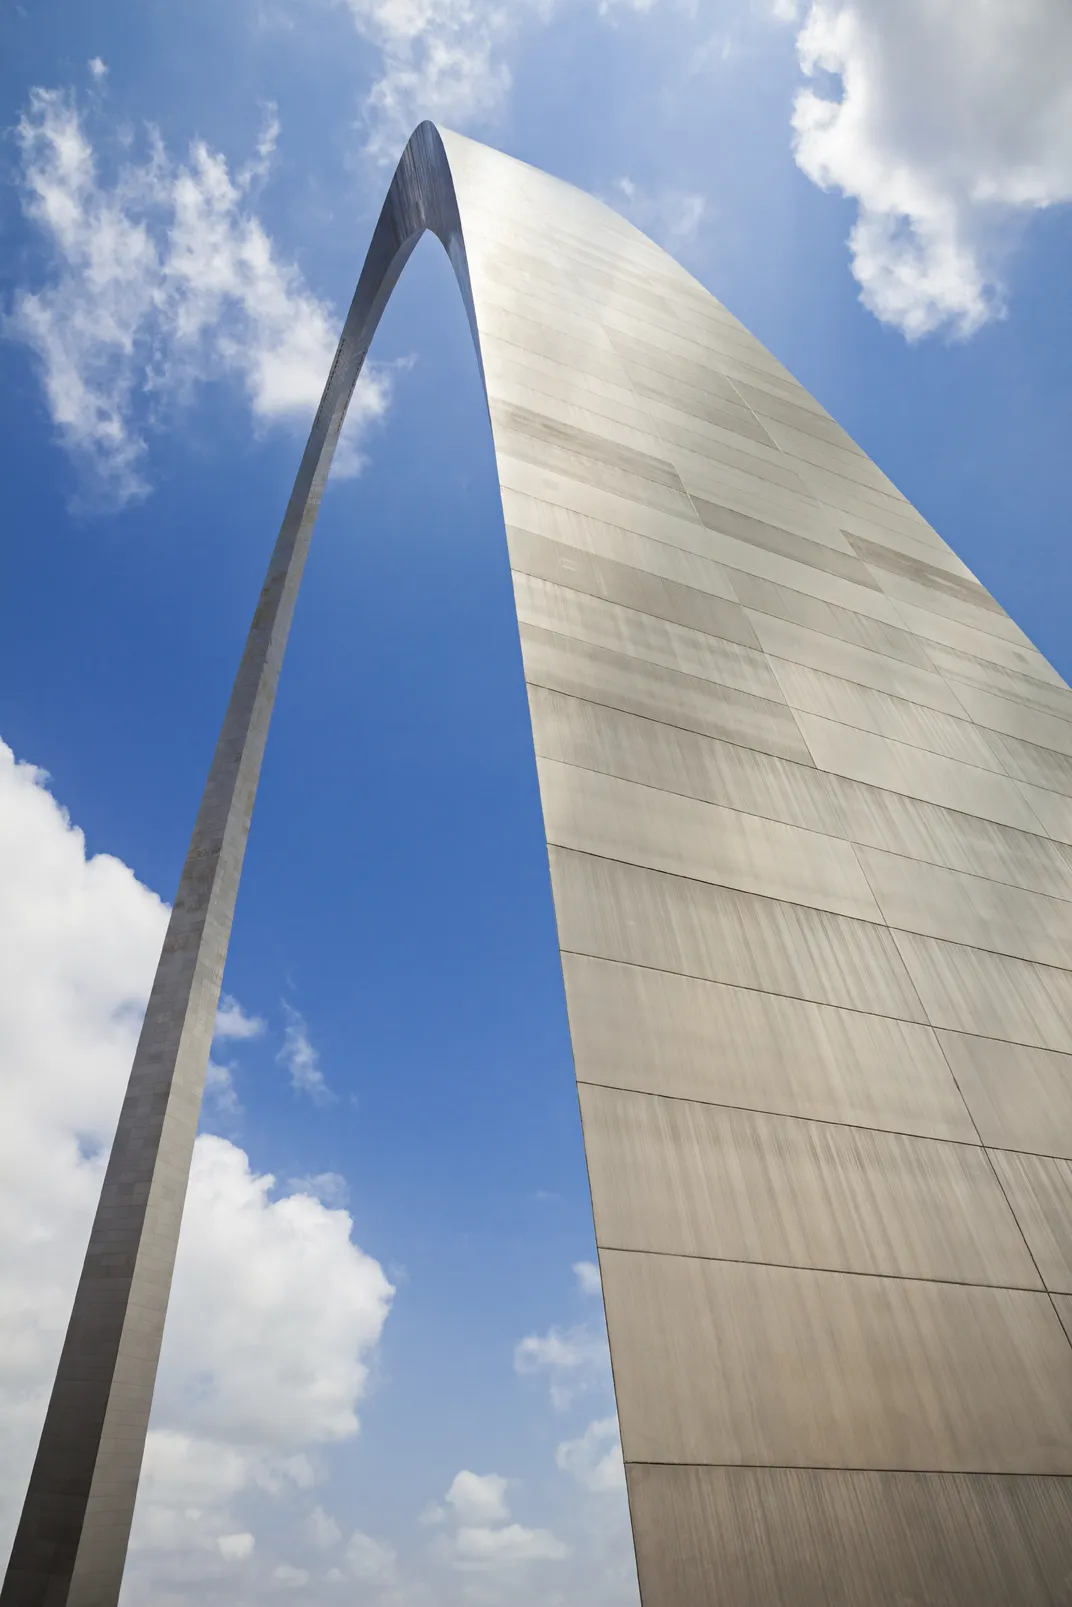 In high winds, the arch can sway 18 inches. (Eurobanks/iStock)